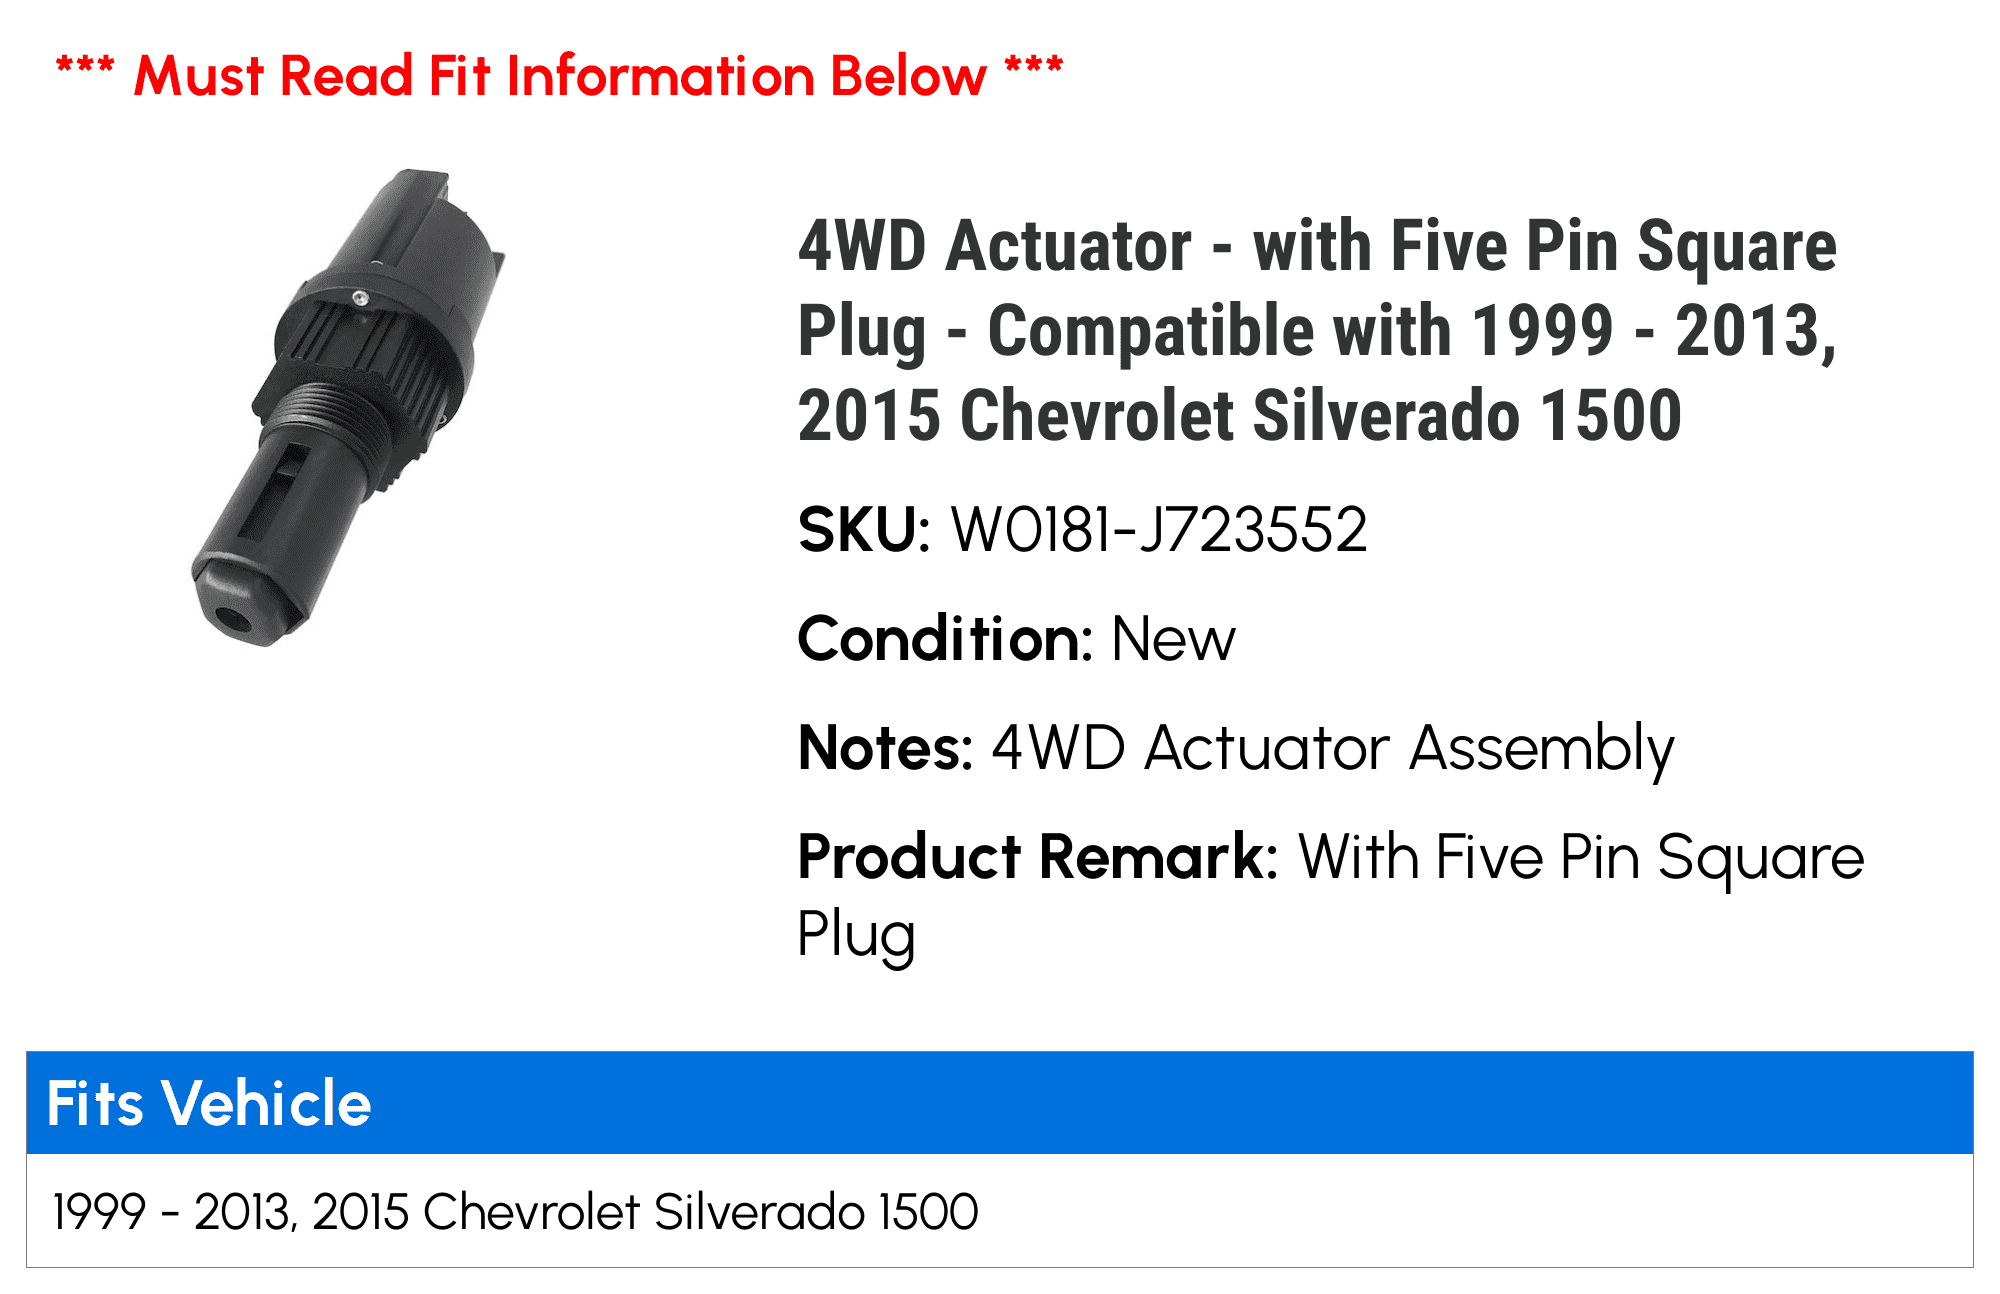 2015 Chevy Silverado 1500 Compatible with 1999-2013 with Five Pin Square Plug 4WD Actuator 